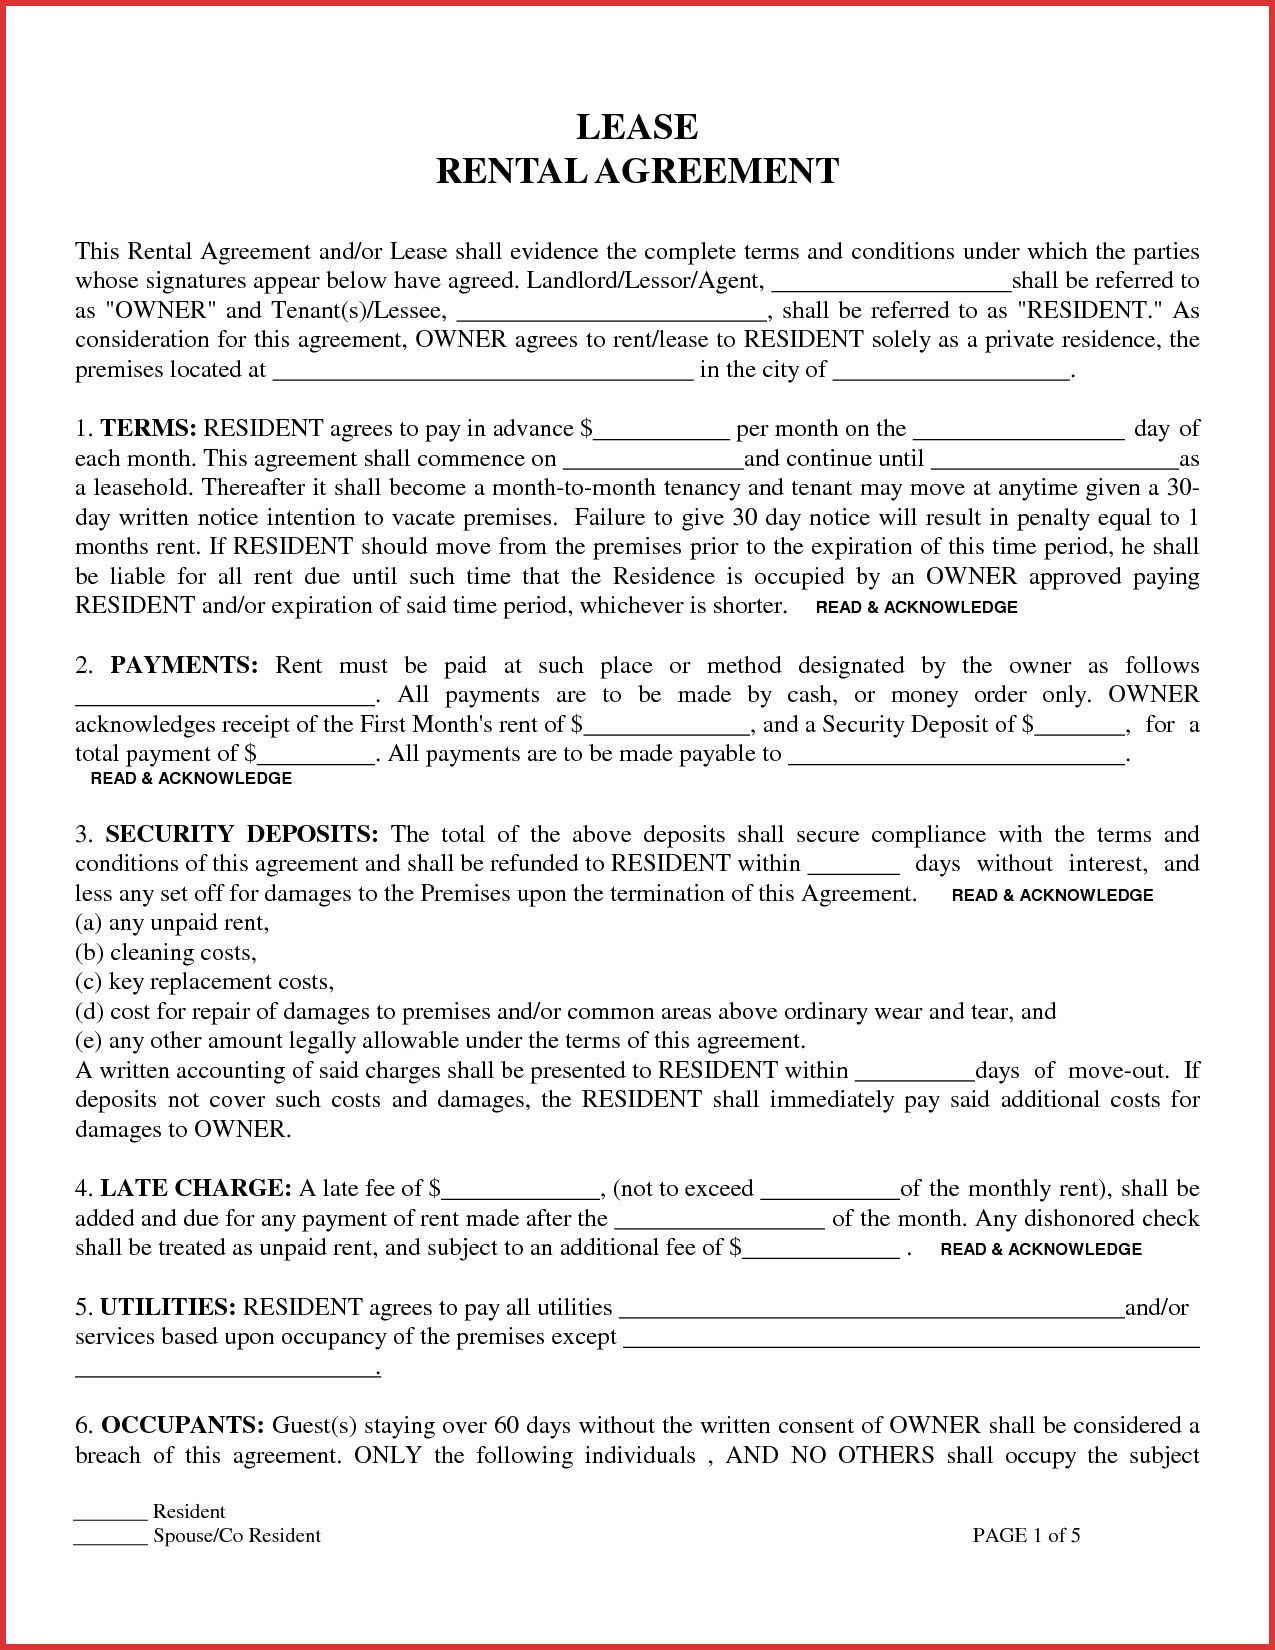 Printable Lease Agreement Apartment Lease Contract Unique Free Printable Residential Lease